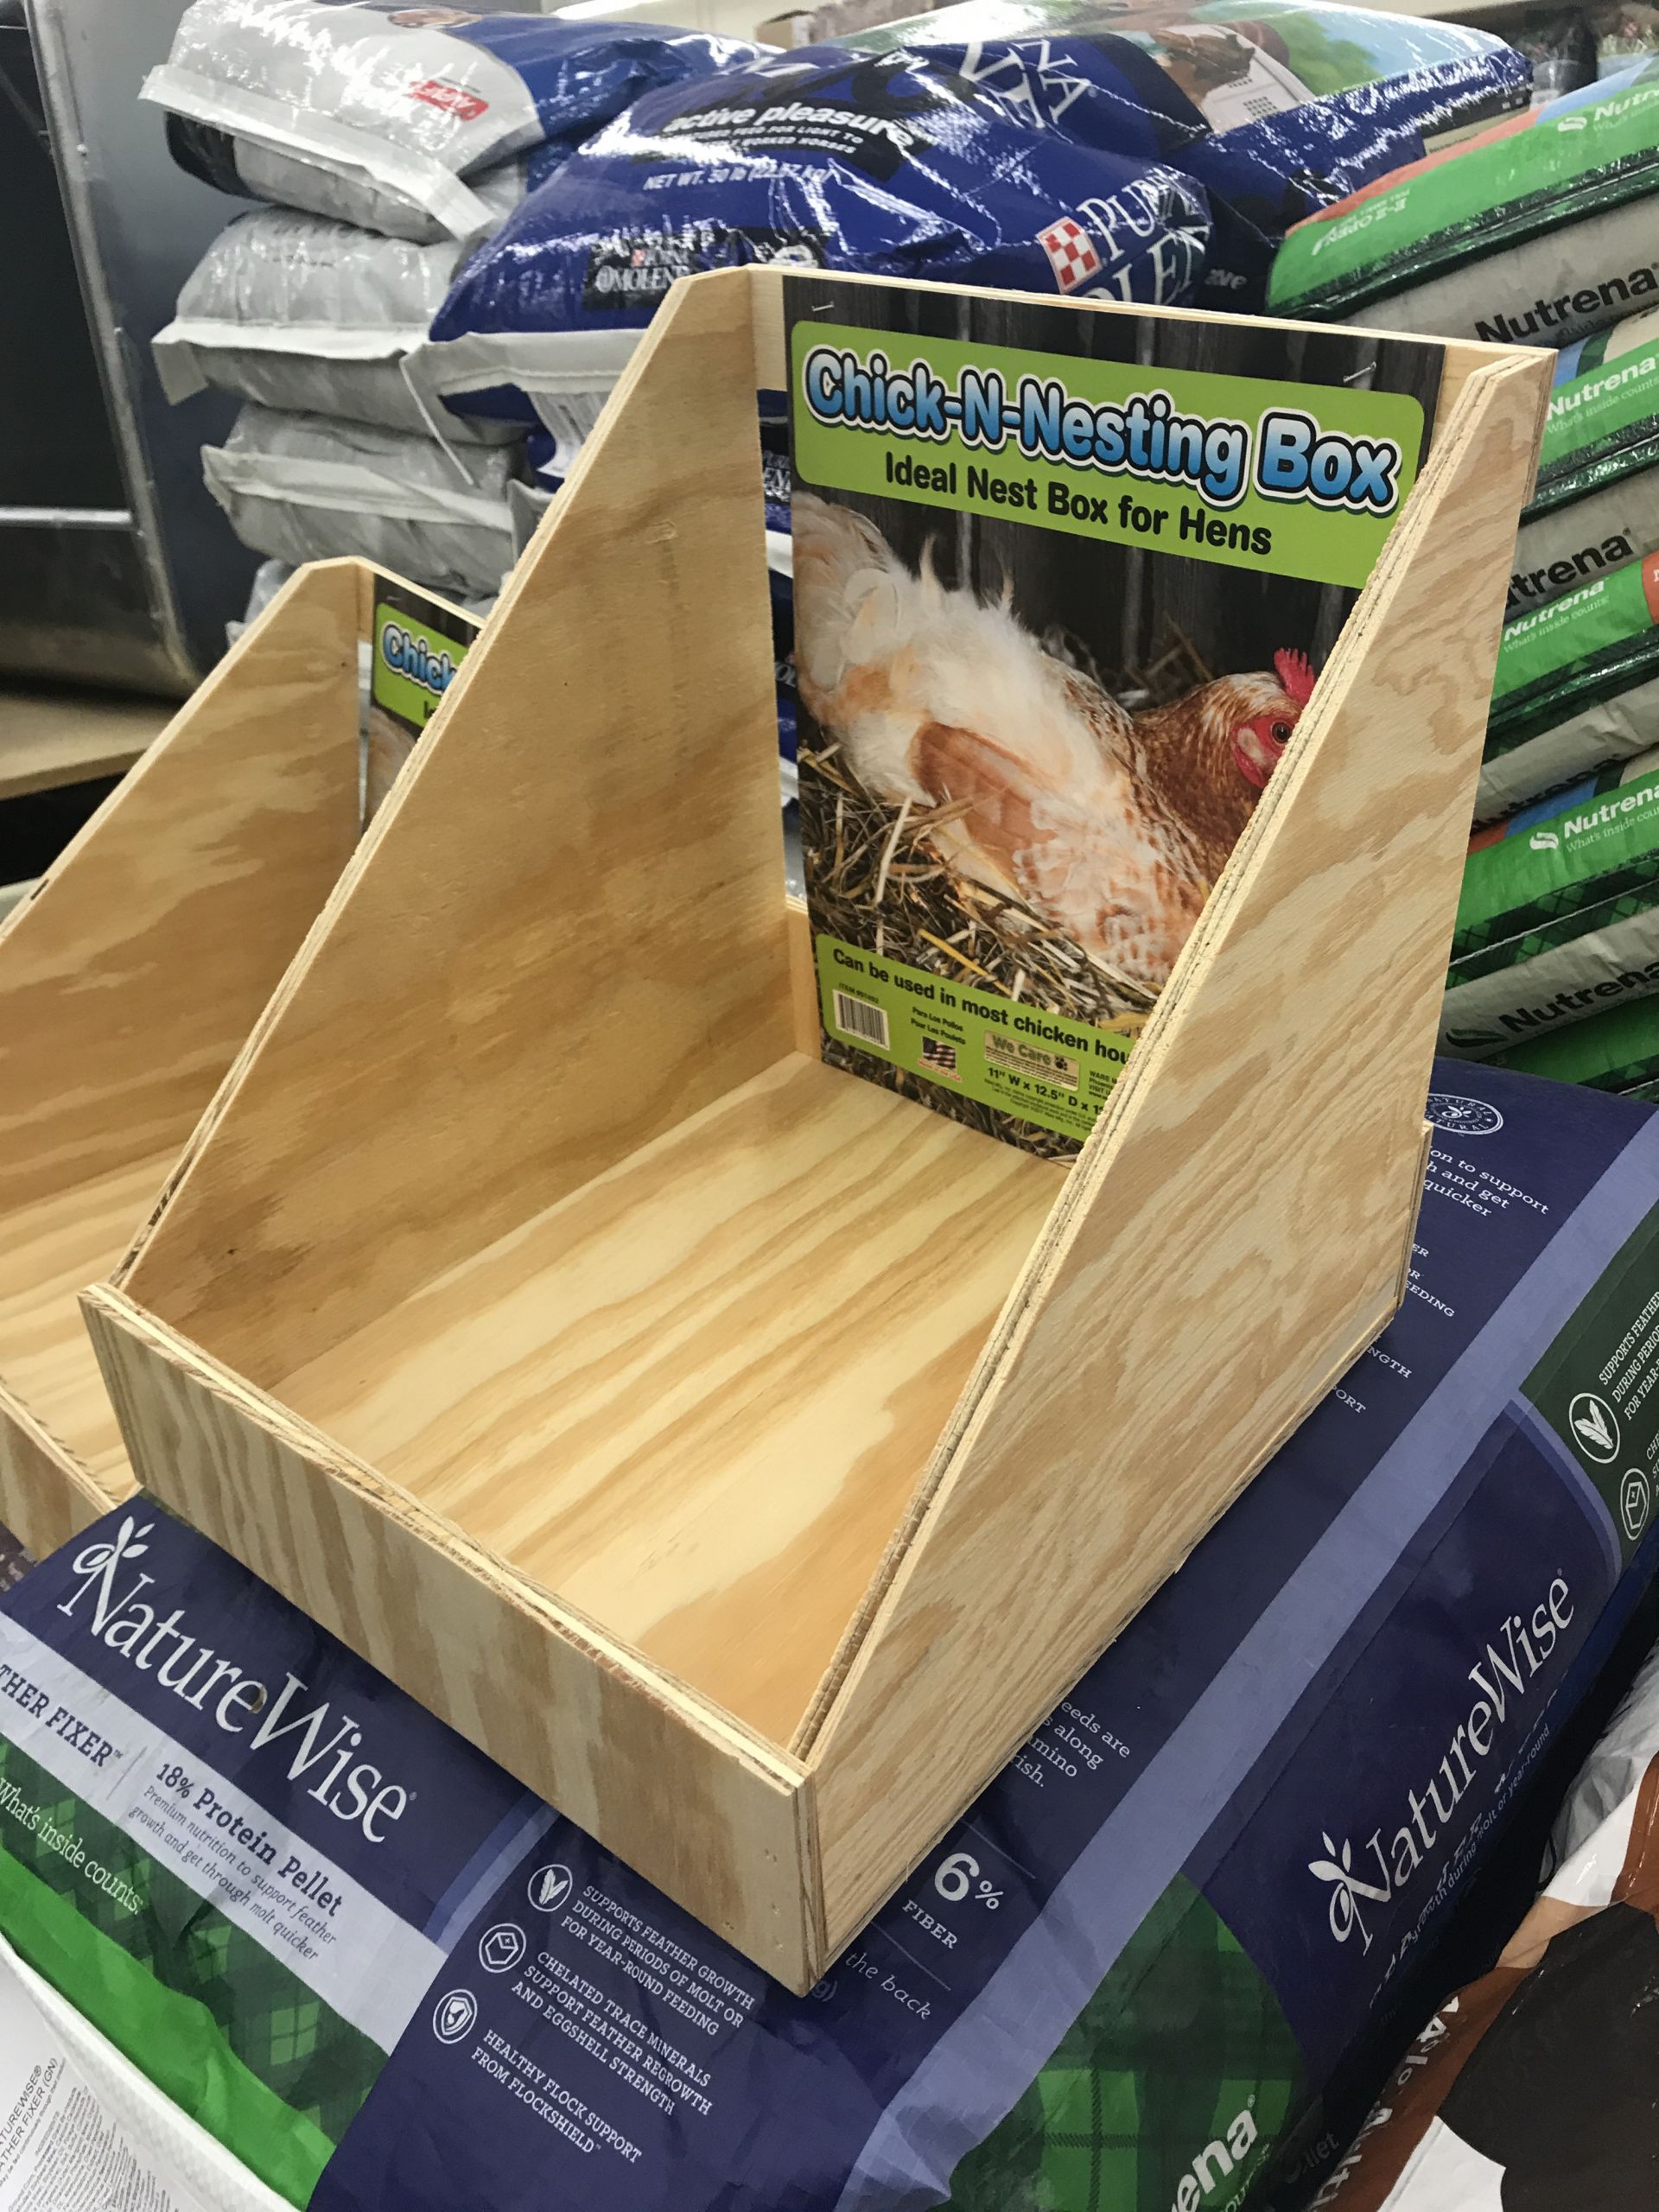 DIY Nesting Boxes
 DIY Chicken Nesting Boxes for $15